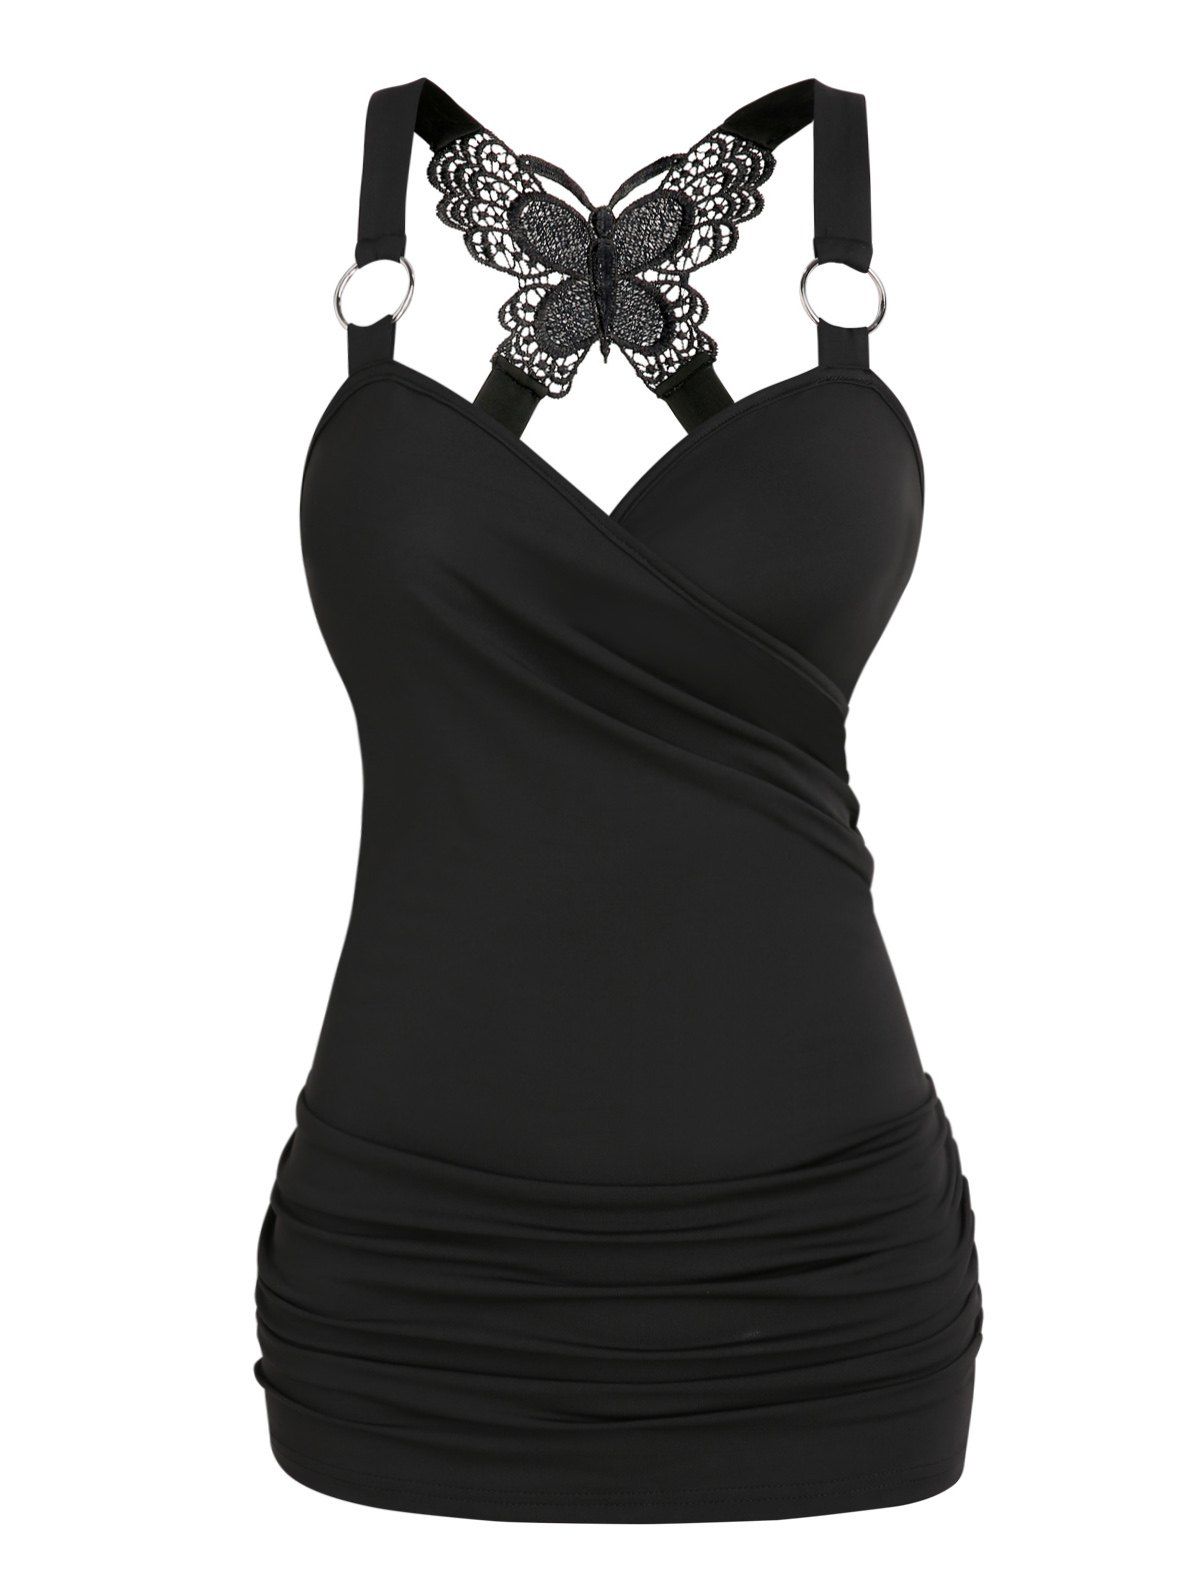 Gothic Tank Top Ruched Butterfly Lace Cross Tank Top O Ring Surplice Summer Top - BLACK XXL